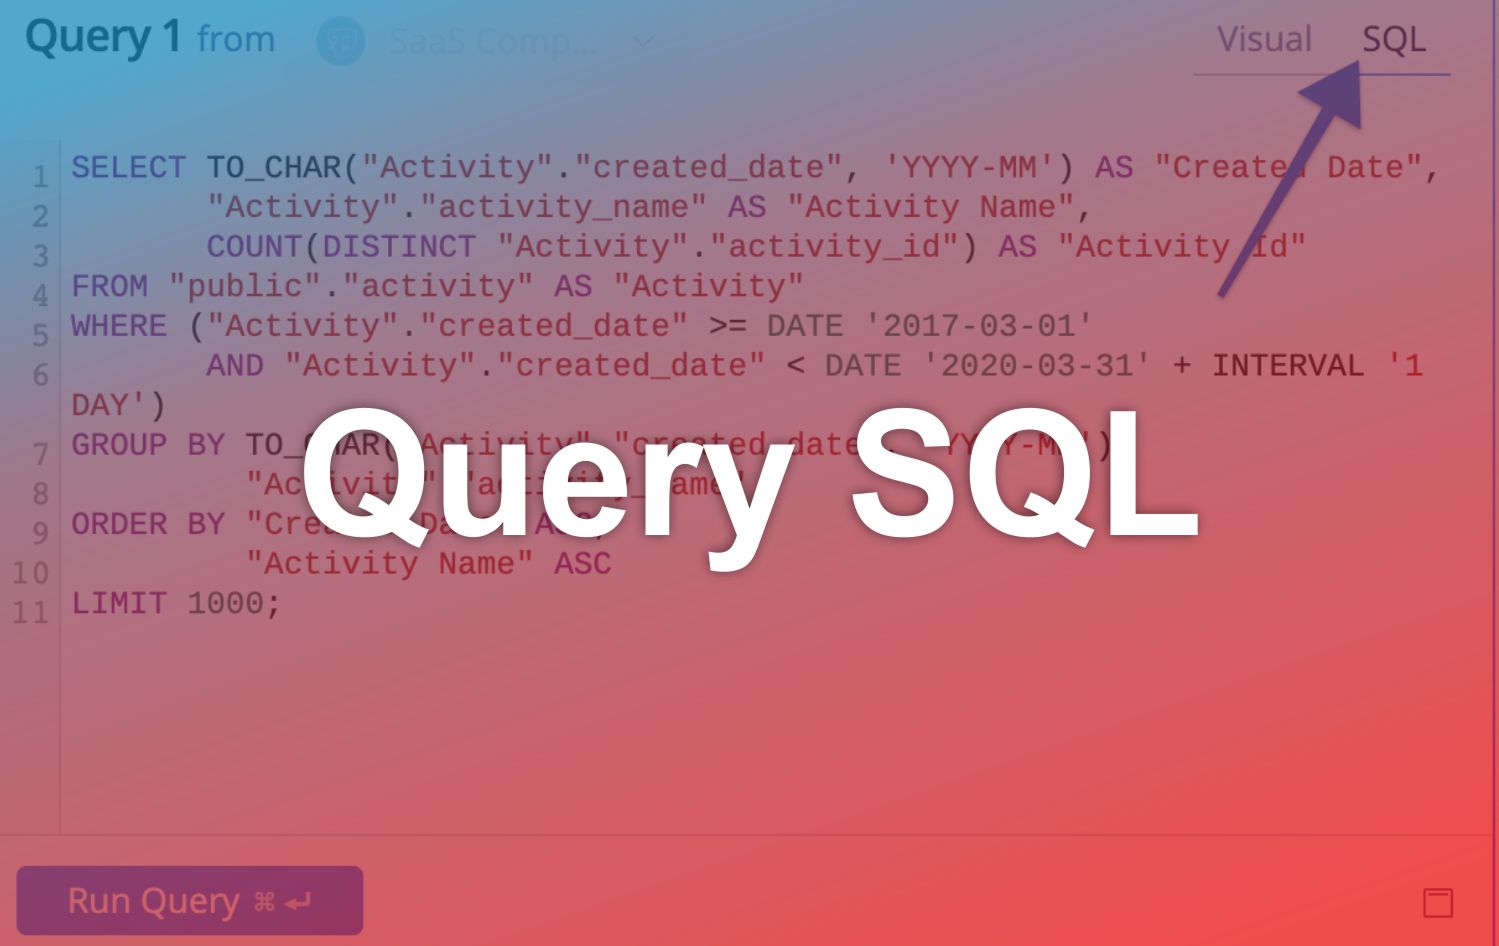 What is Query SQL